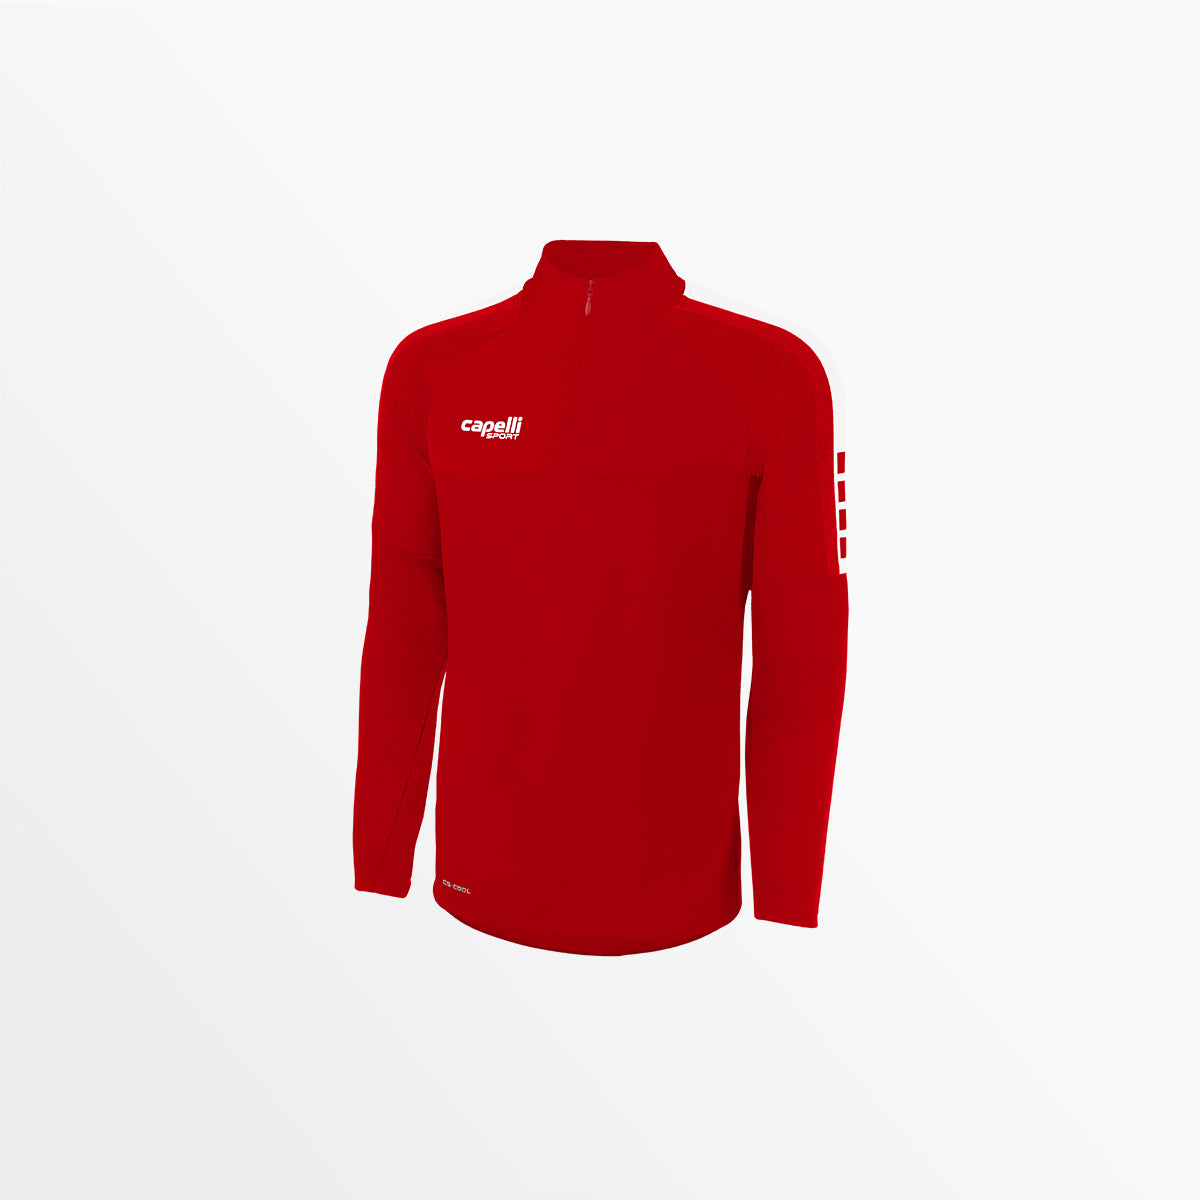 YOUTH MADISON 1/4 ZIP TECHNICAL TRAINING TOP